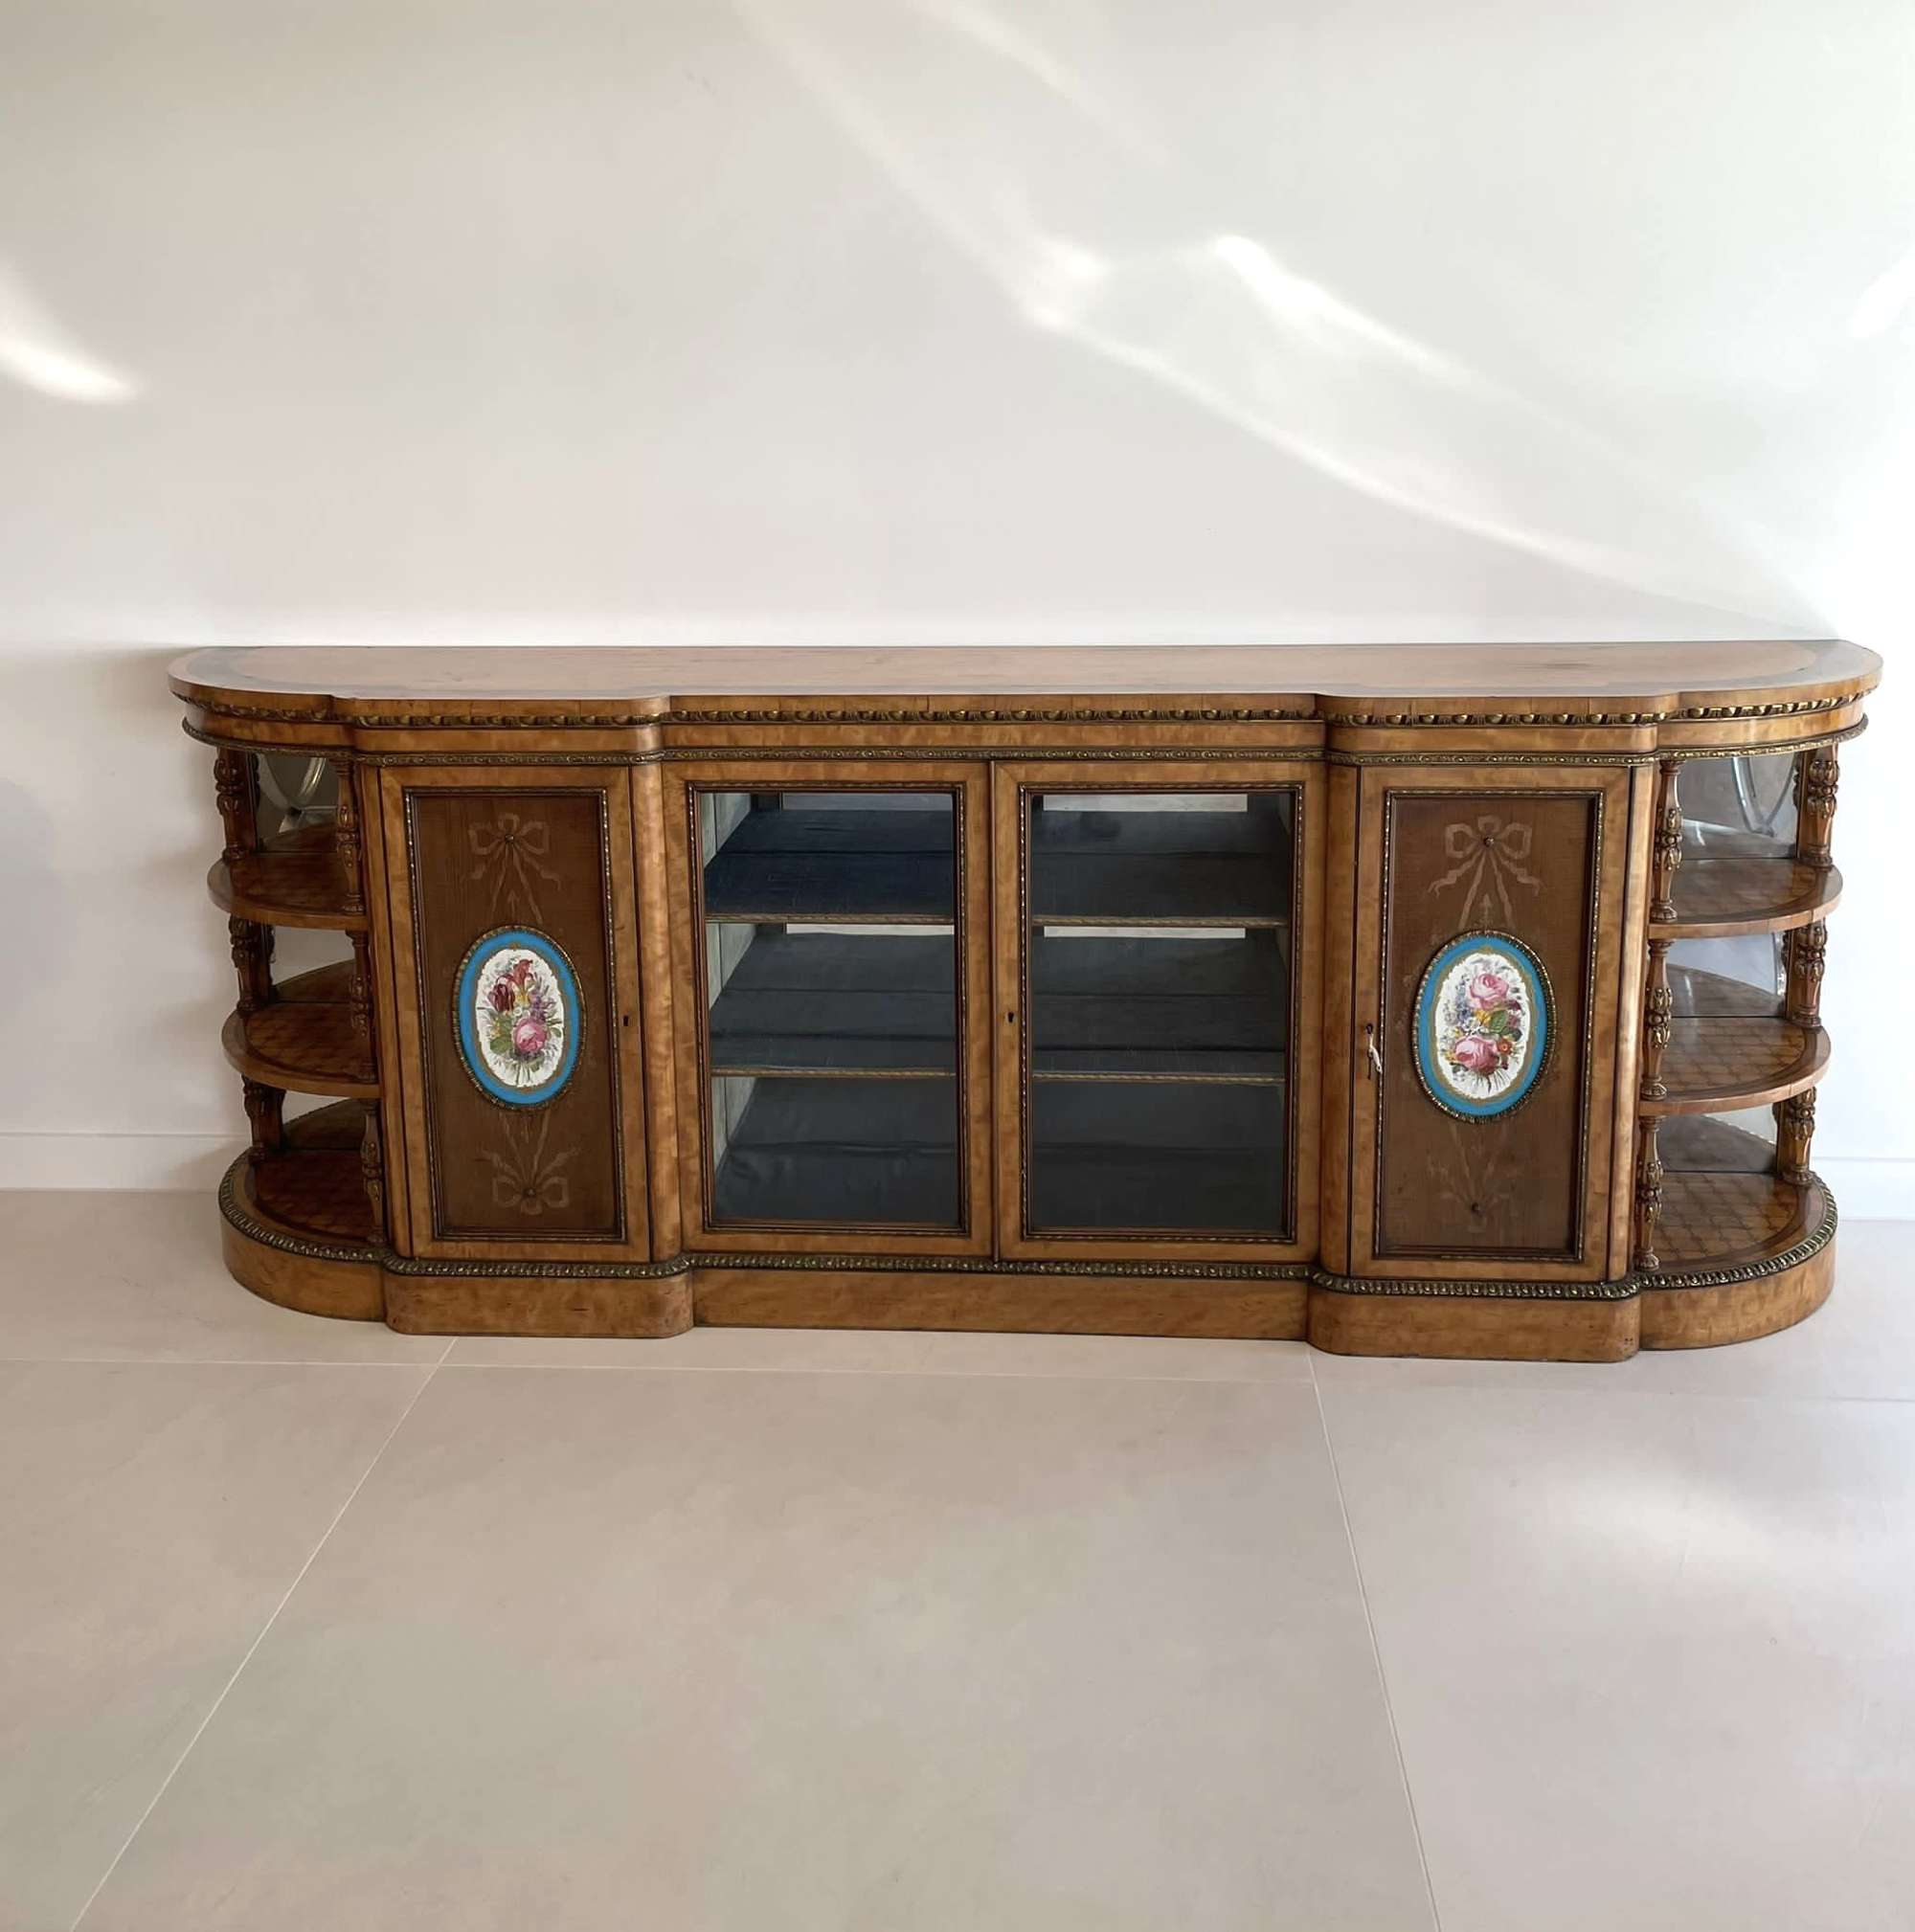 Magnificent Quality Large Satinwood Inland And Ormolu Mounted Credenza